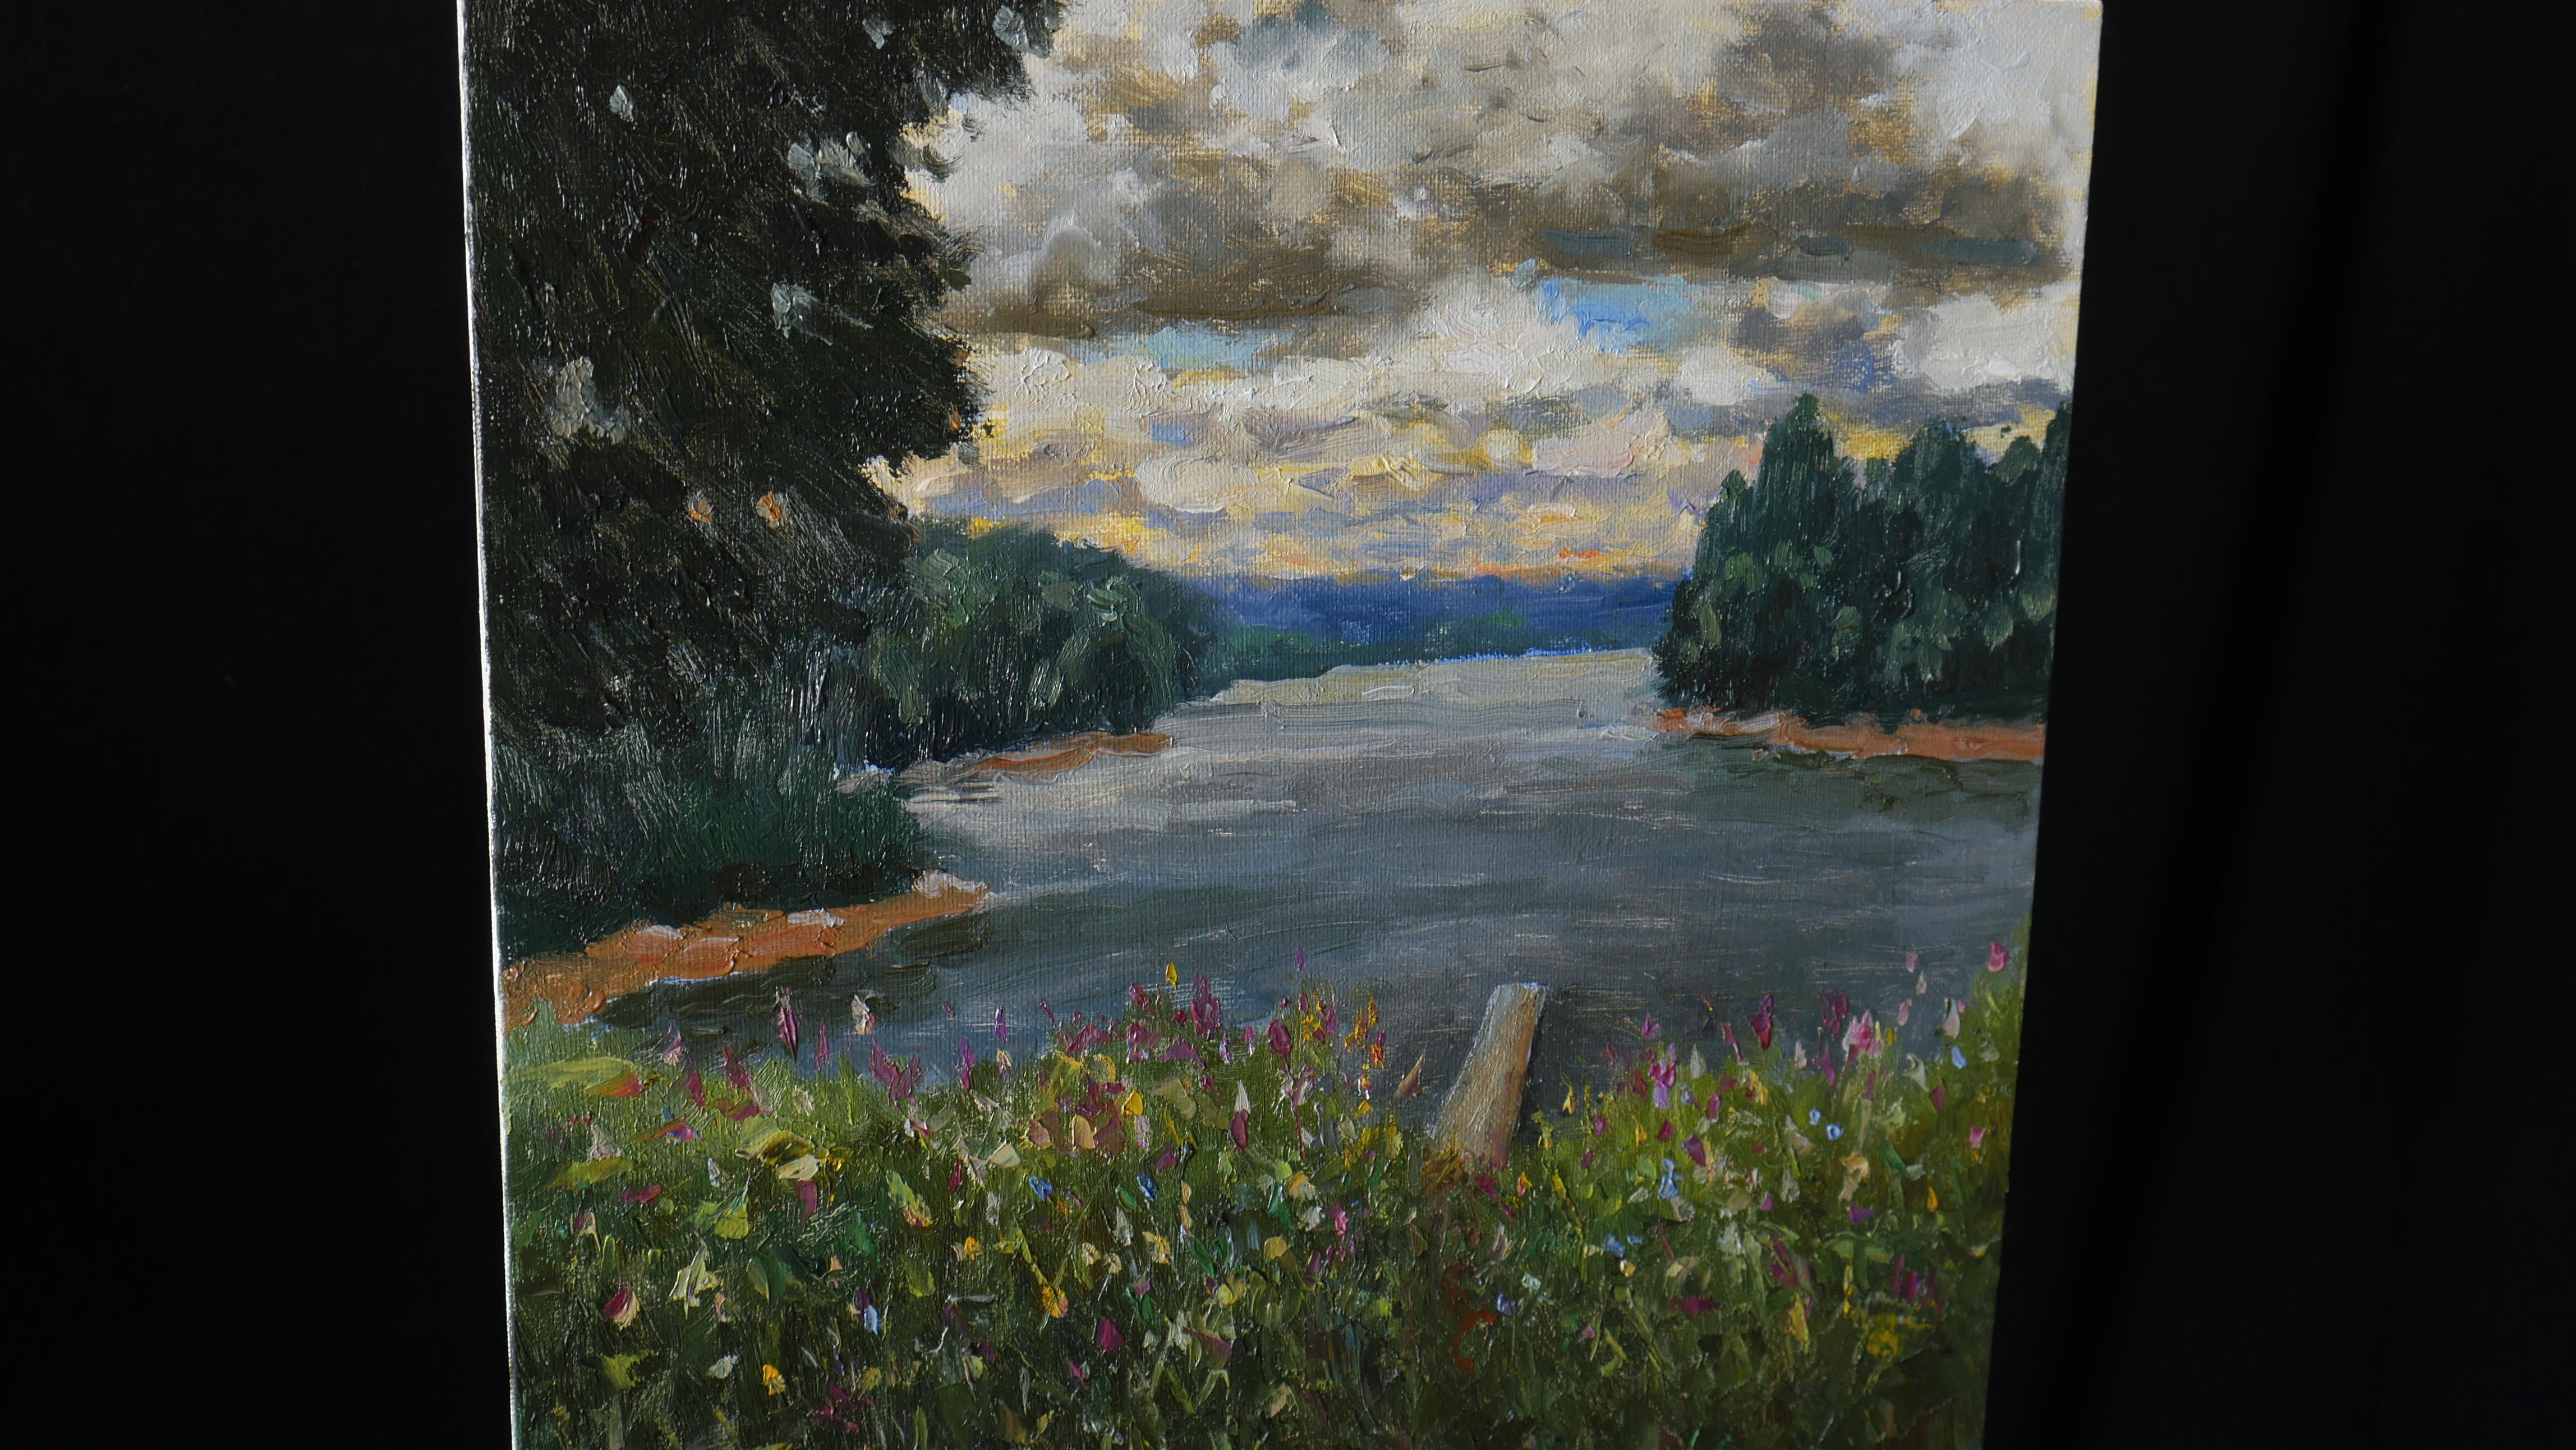 The Cloudy Sky - original summer landscape, painting - Impressionist Painting by Nikolay Dmitriev